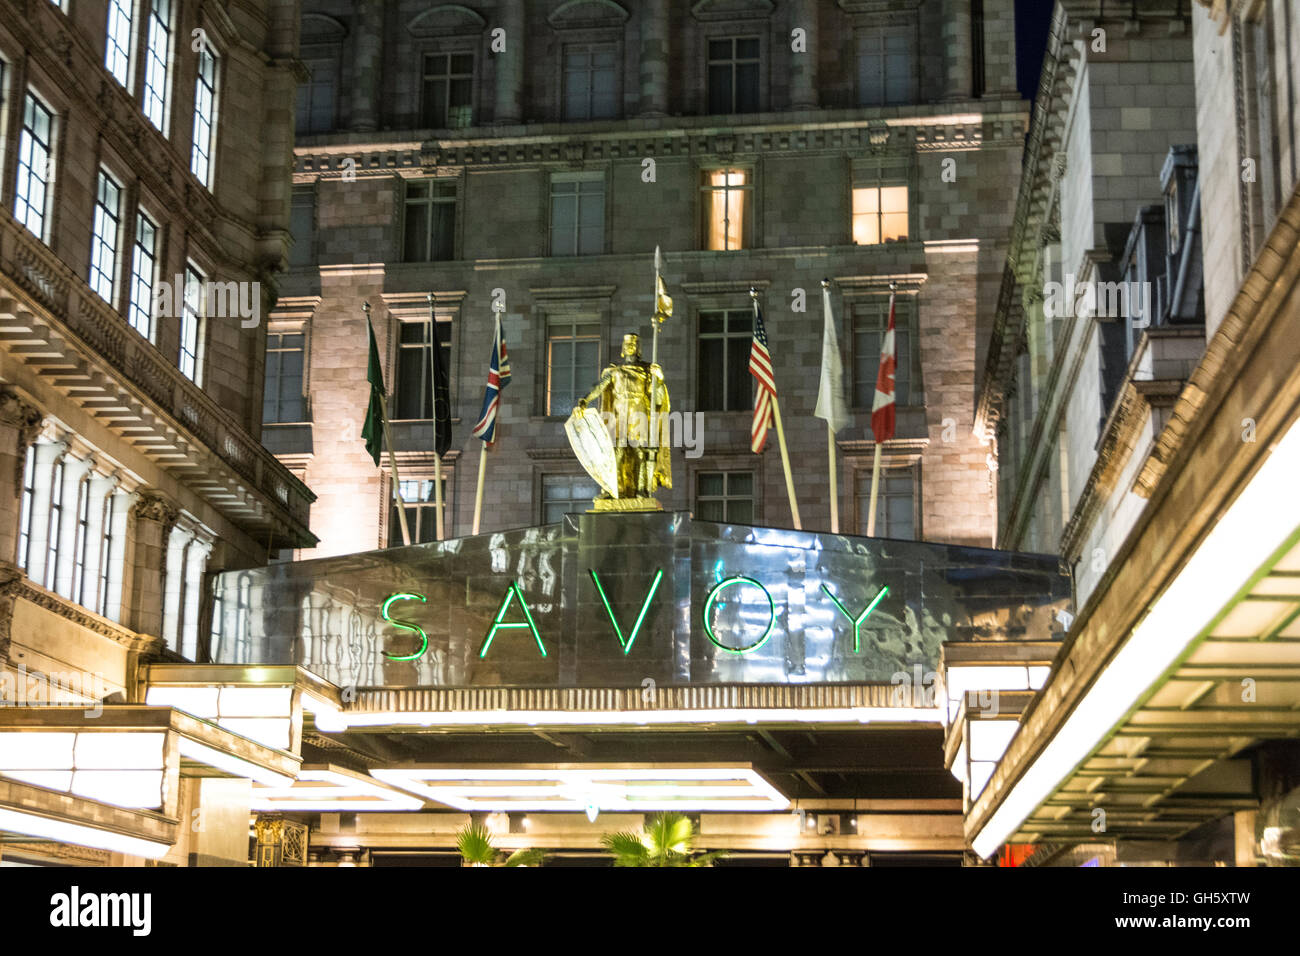 The entrance to the Savoy Hotel in Savoy Court on the Strand in London England Stock Photo